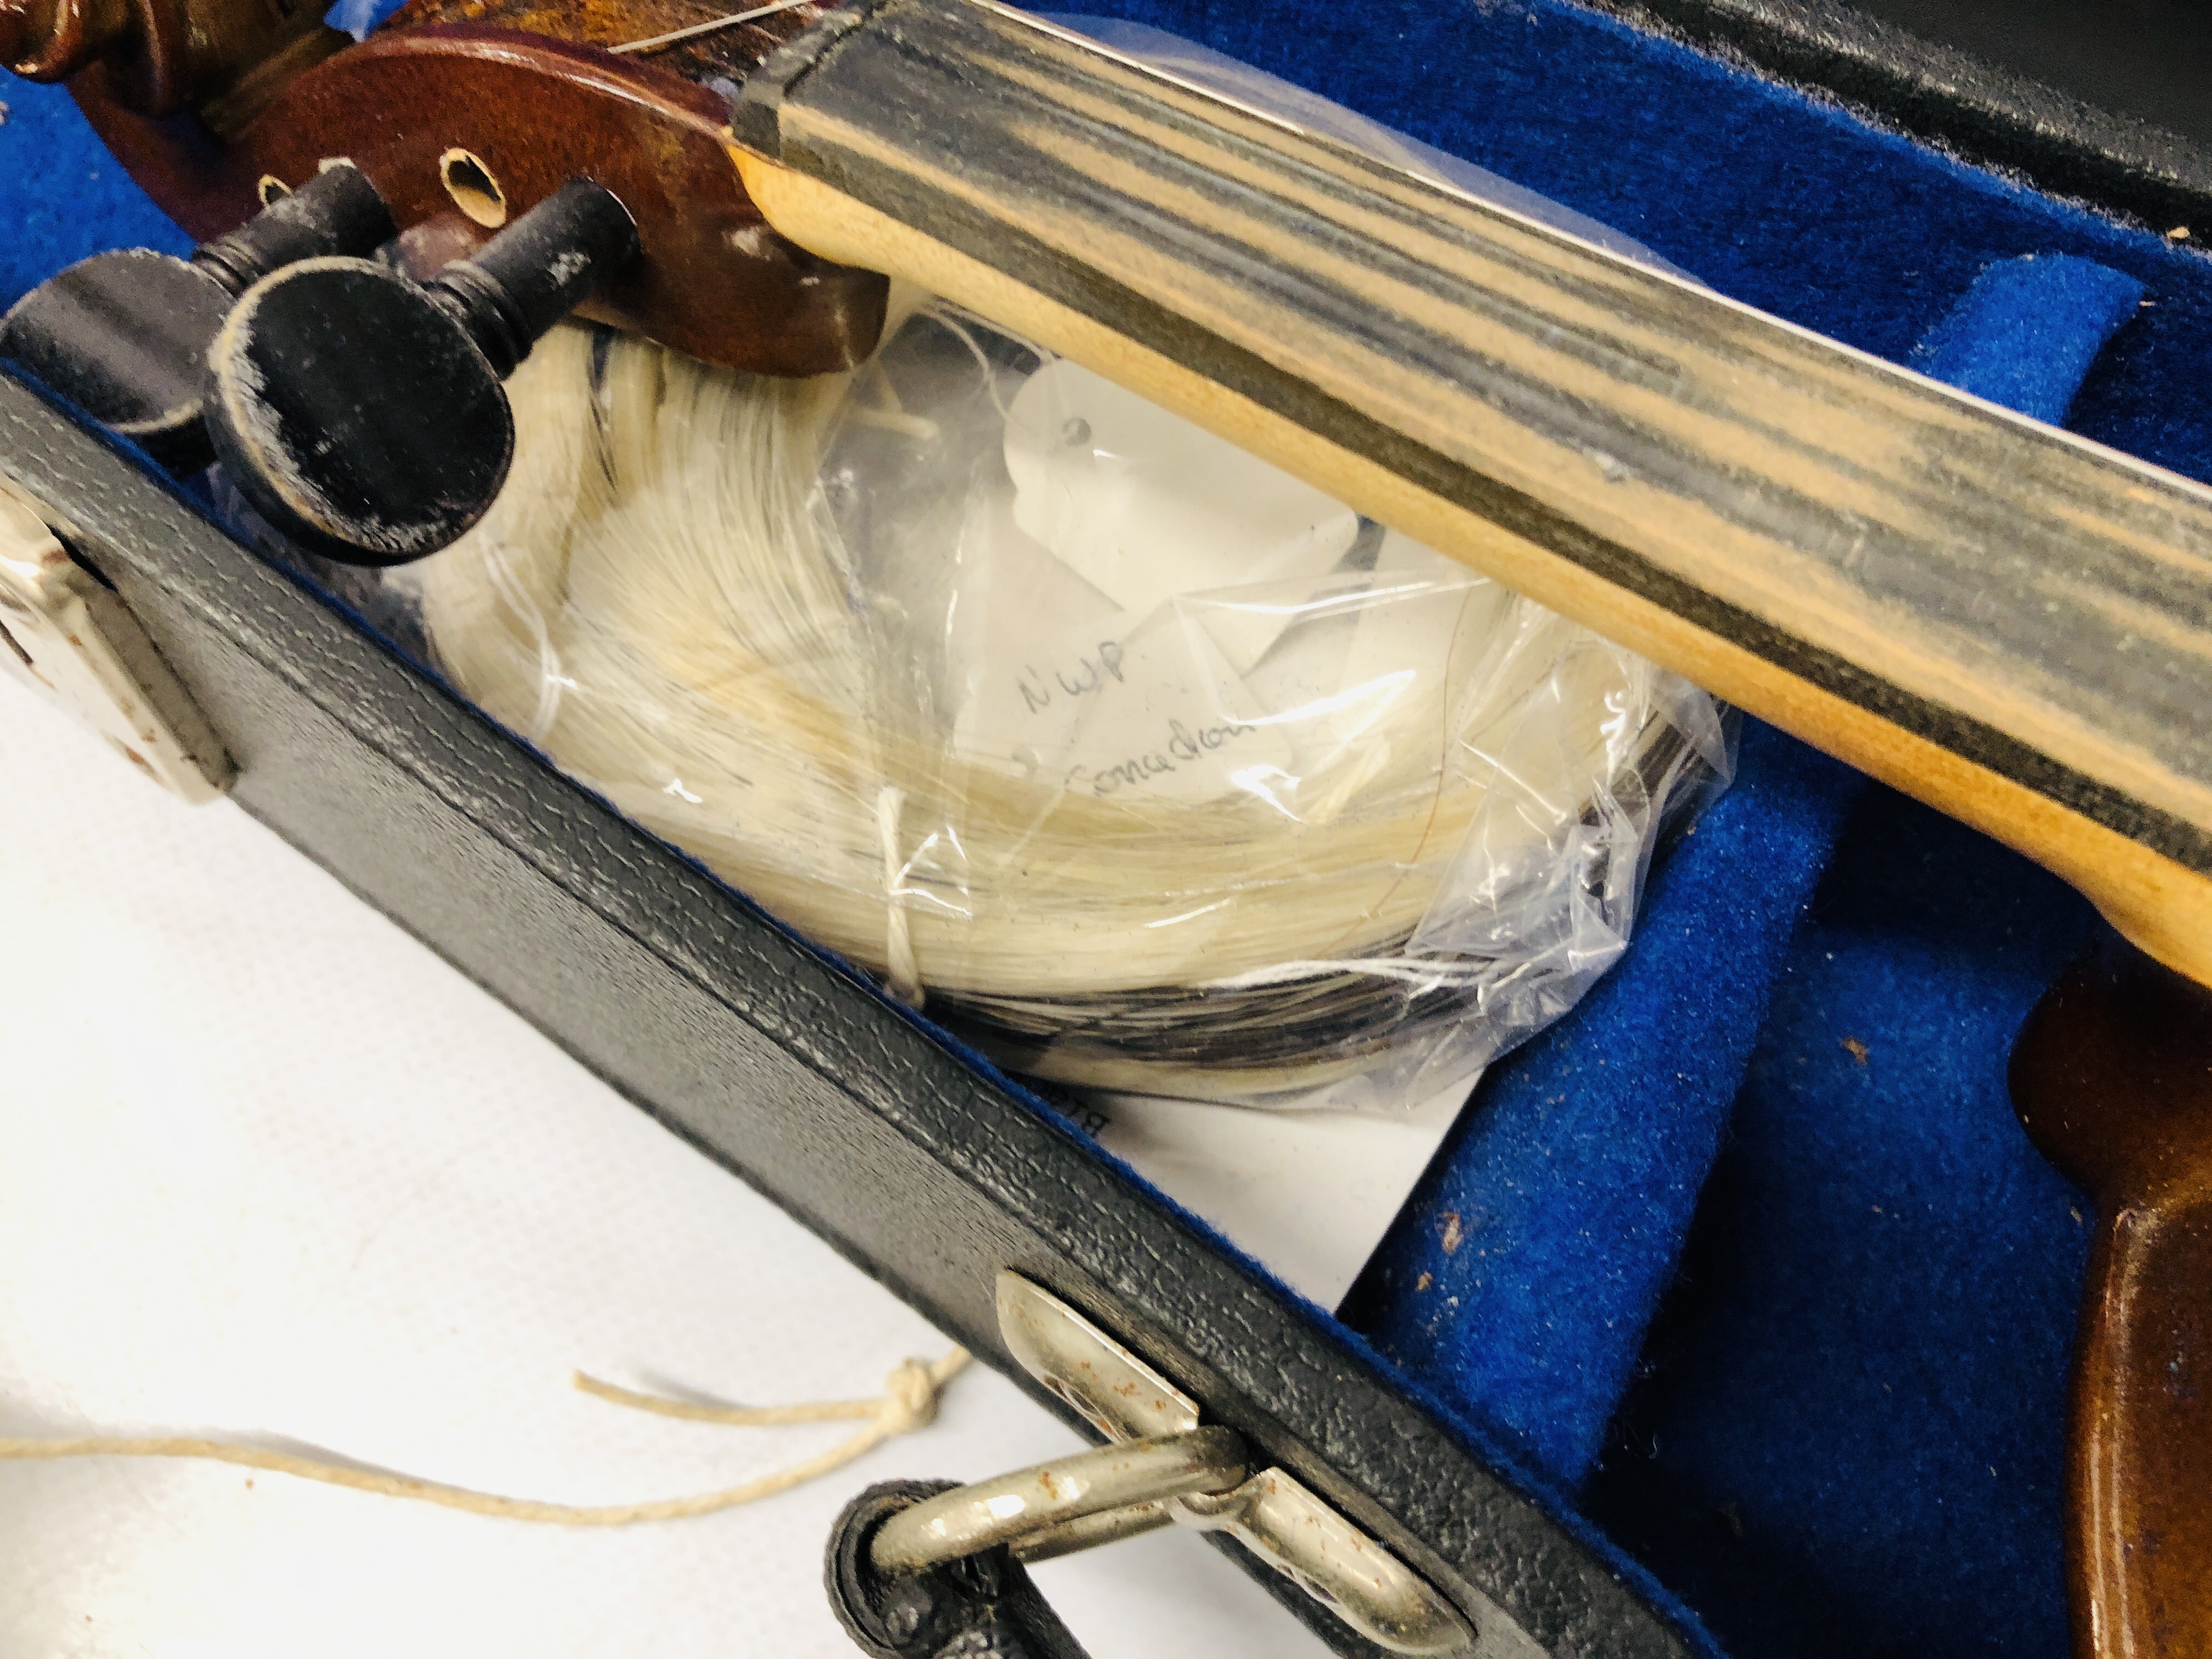 4 X VINTAGE VIOLINS AND 2 WOODEN CASES, VARIOUS BOWS (NO STRINGS) FOR RESTORATION. - Image 13 of 20